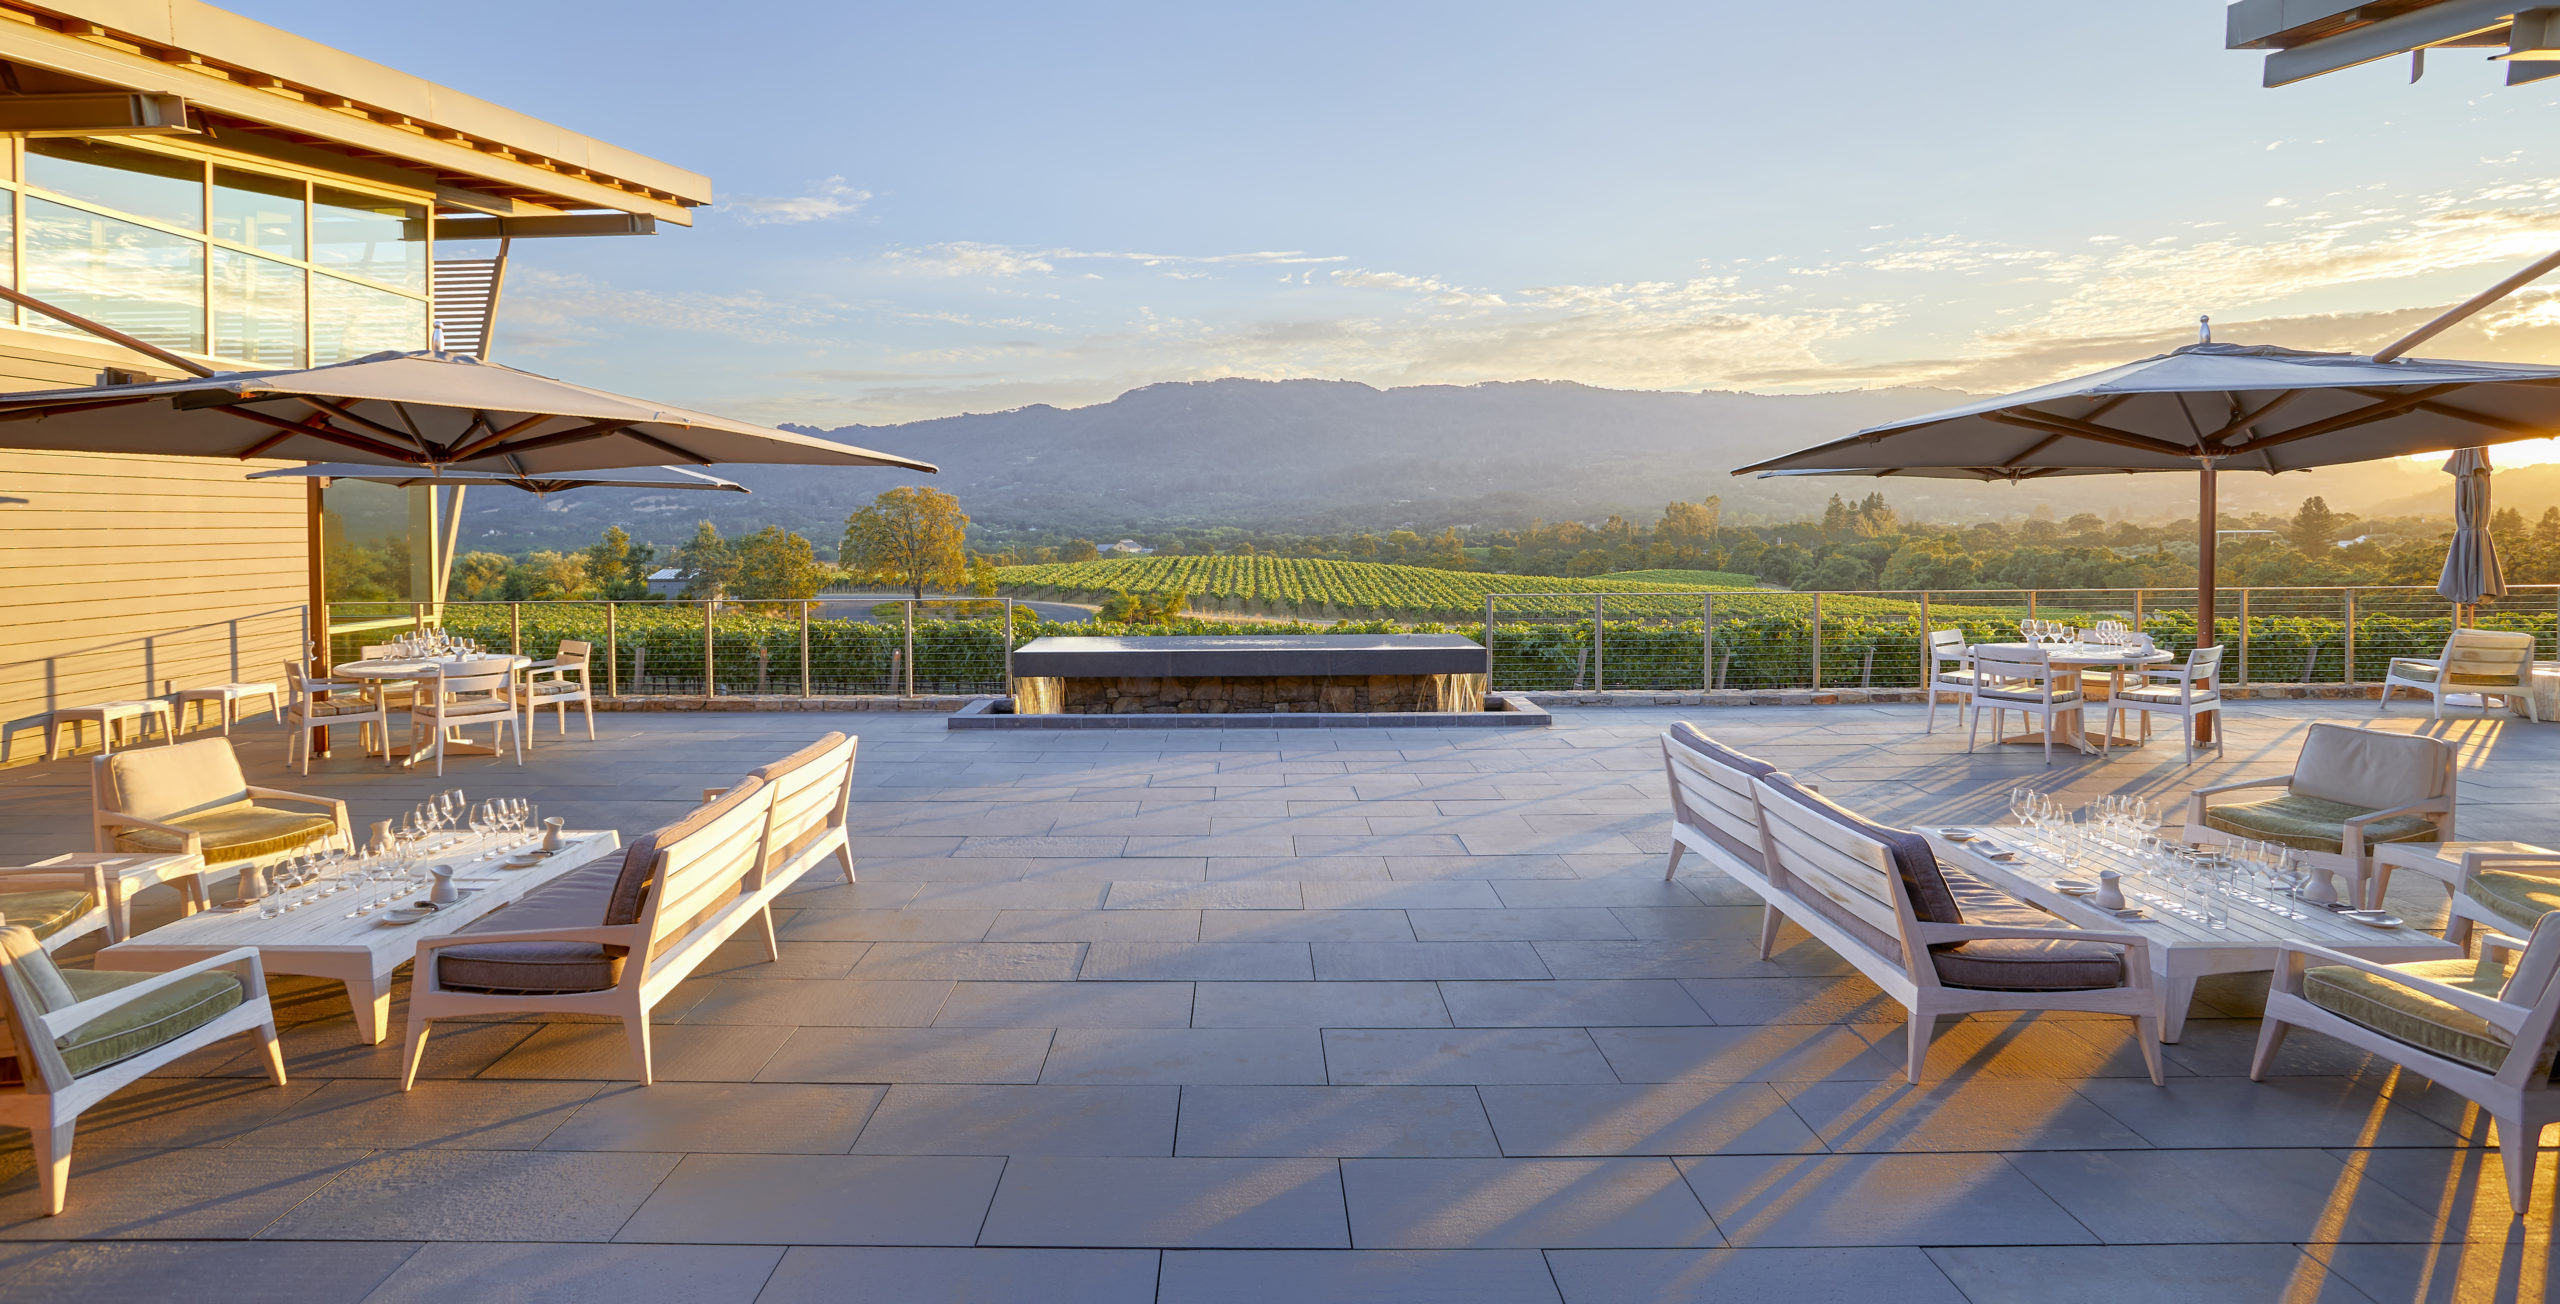 Outdoor dining area at Hamel Family Wines in Sonoma. (John Bedell)